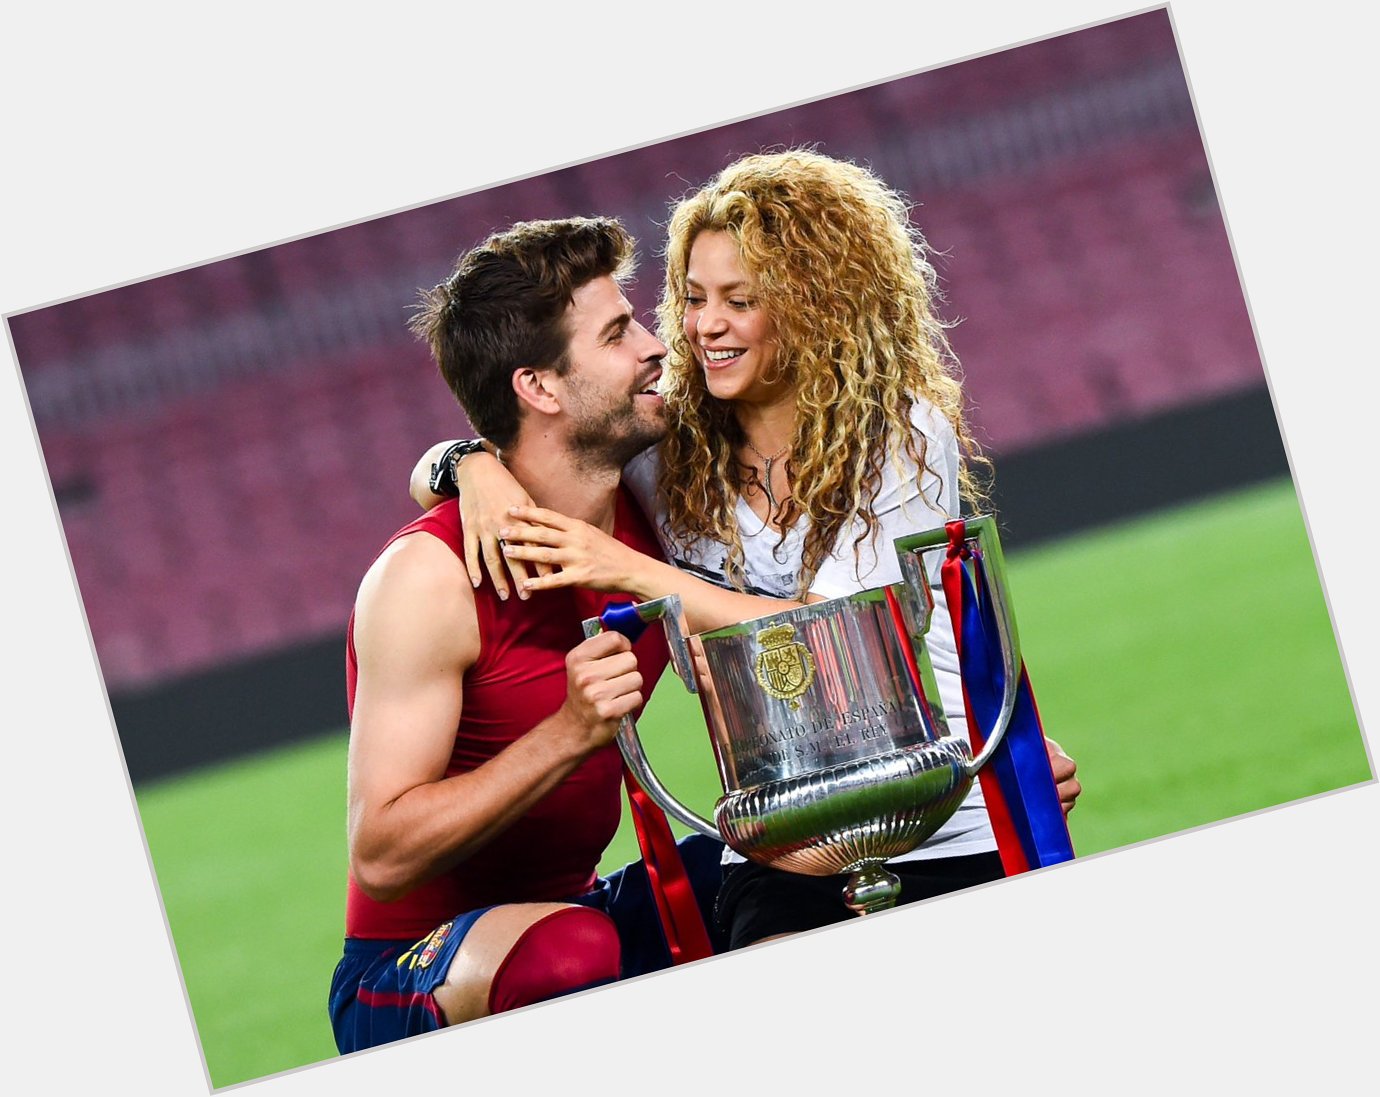 She sang the official song of the 2010 World Cup.

He won it. 

Happy Birthday and  